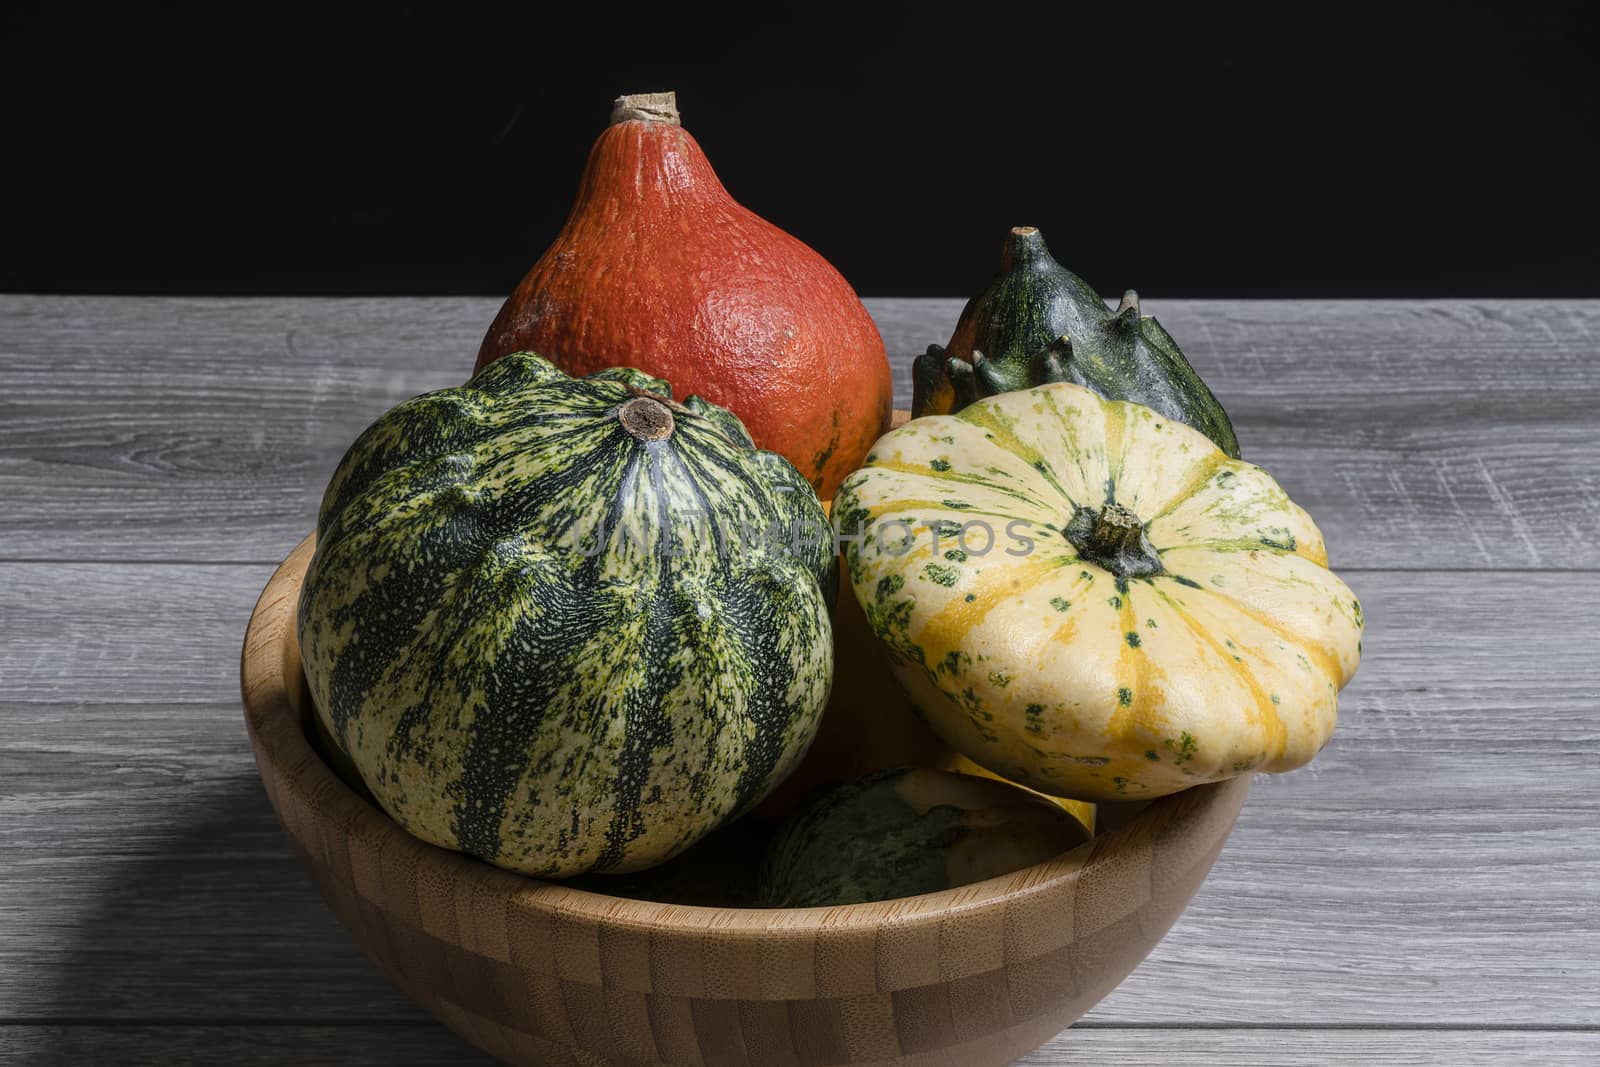 Some small pumpkins in a wooden bowl on the table